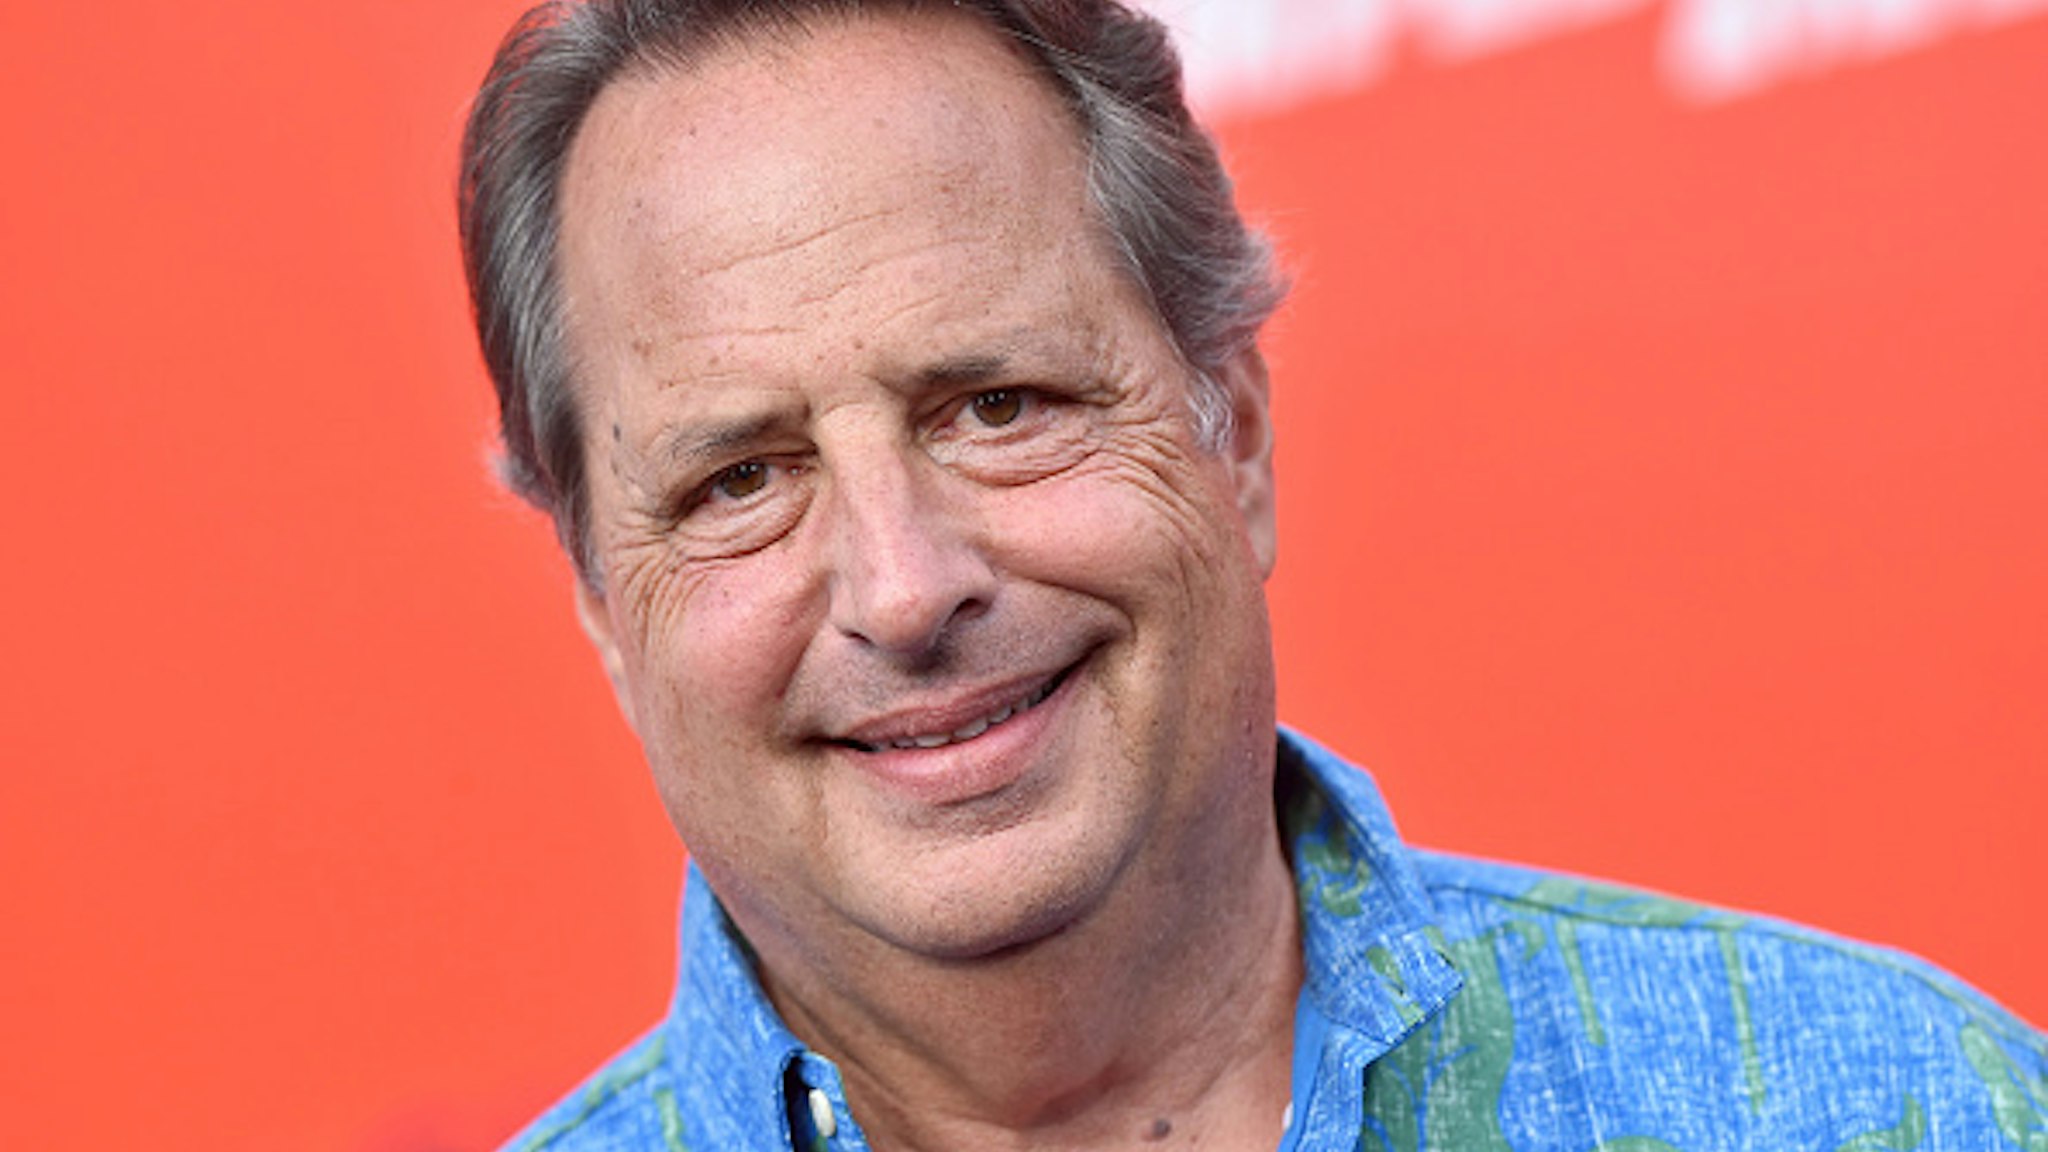 LOS ANGELES, CA - JULY 25: Jon Lovitz attends the premiere of Lionsgate's 'The Spy Who Dumped Me' at Fox Village Theater on July 25, 2018 in Los Angeles, California.